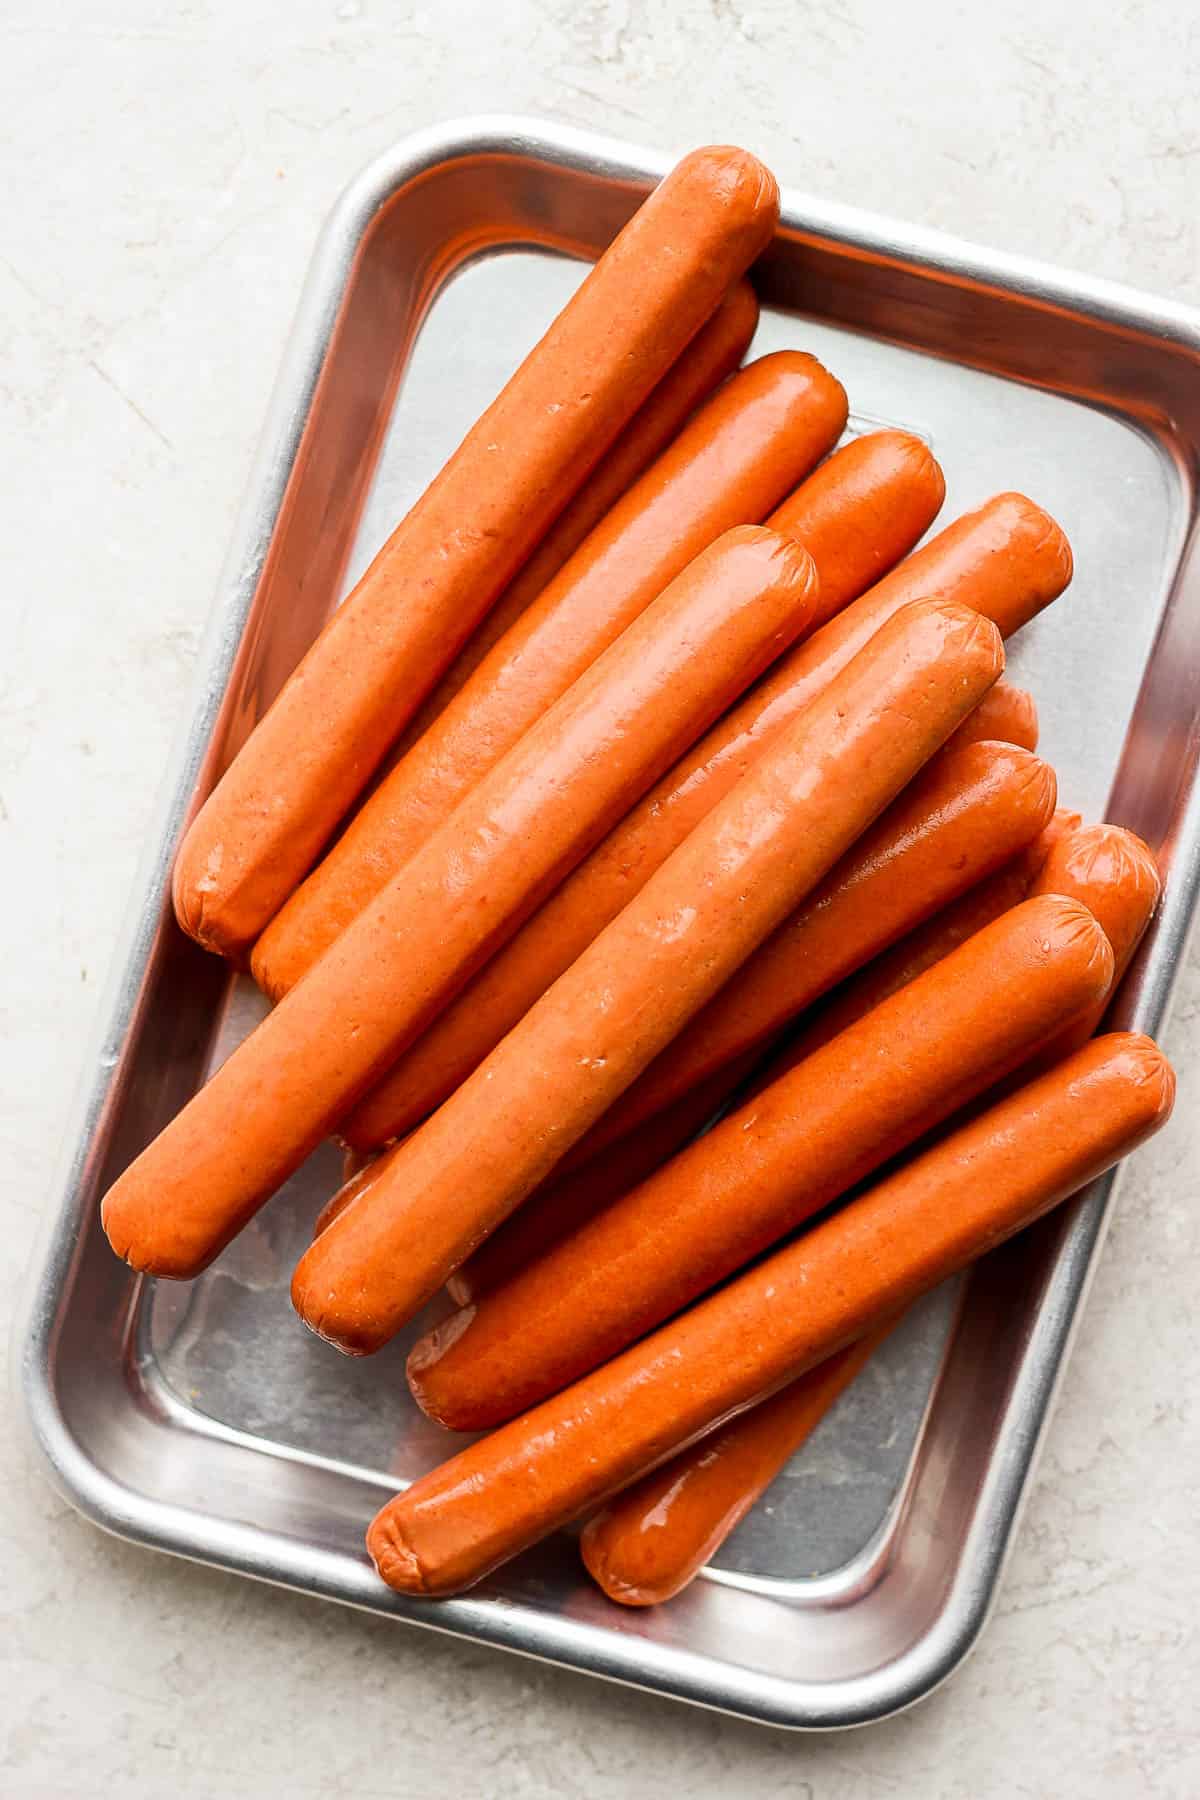 Uncooked hot dogs in a small metal tray.